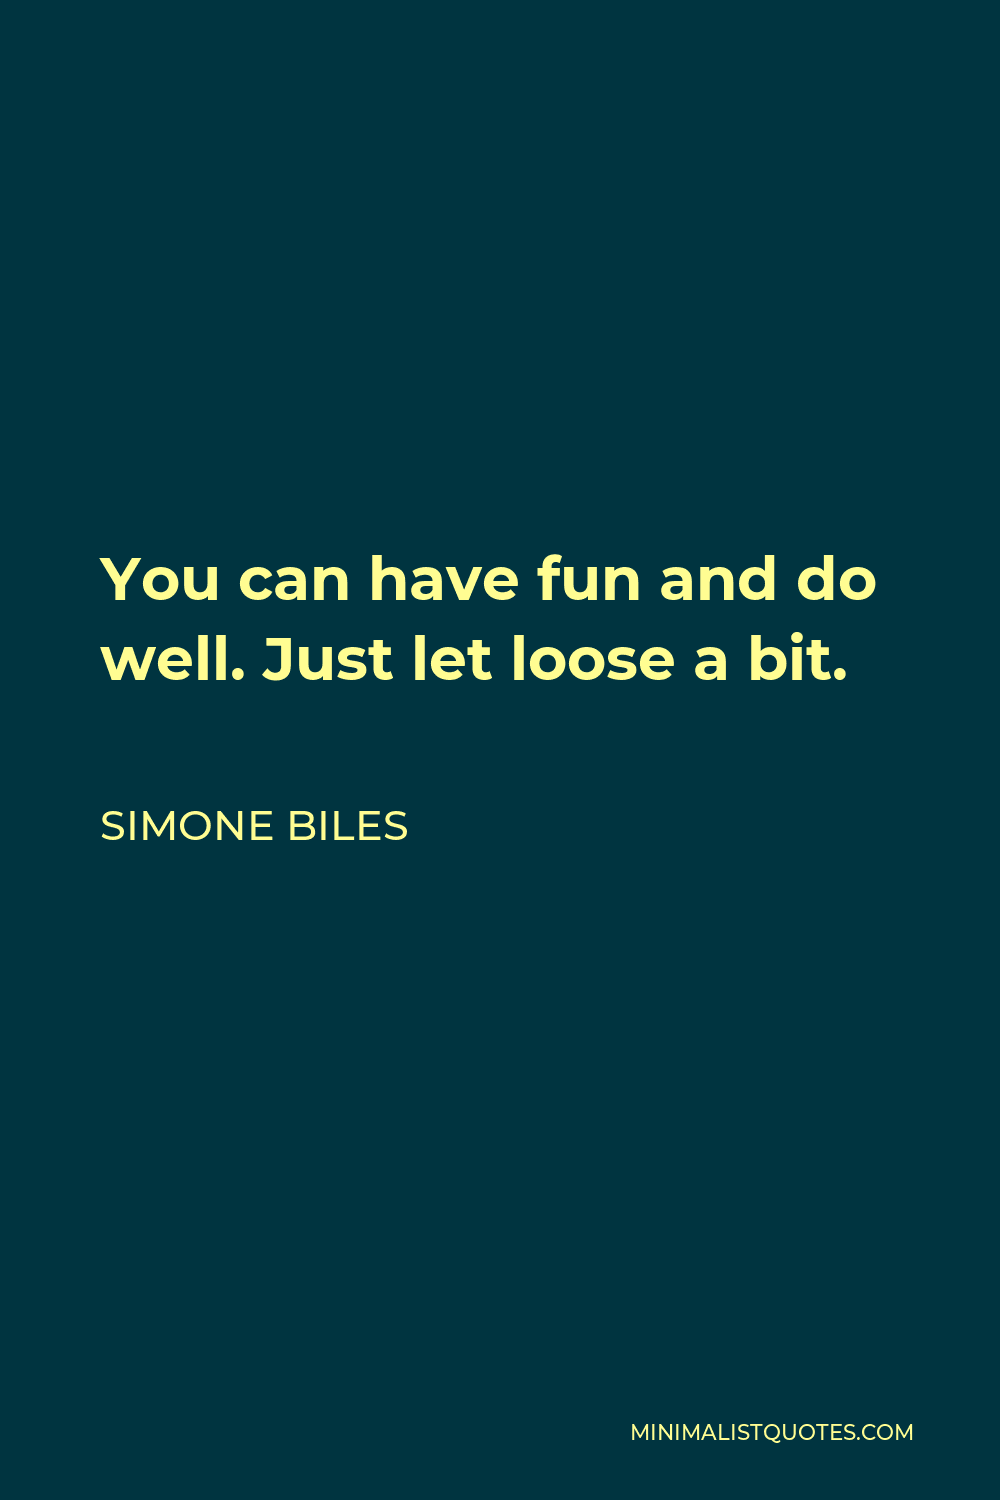 Simone Biles Quote - You can have fun and do well. Just let loose a bit.